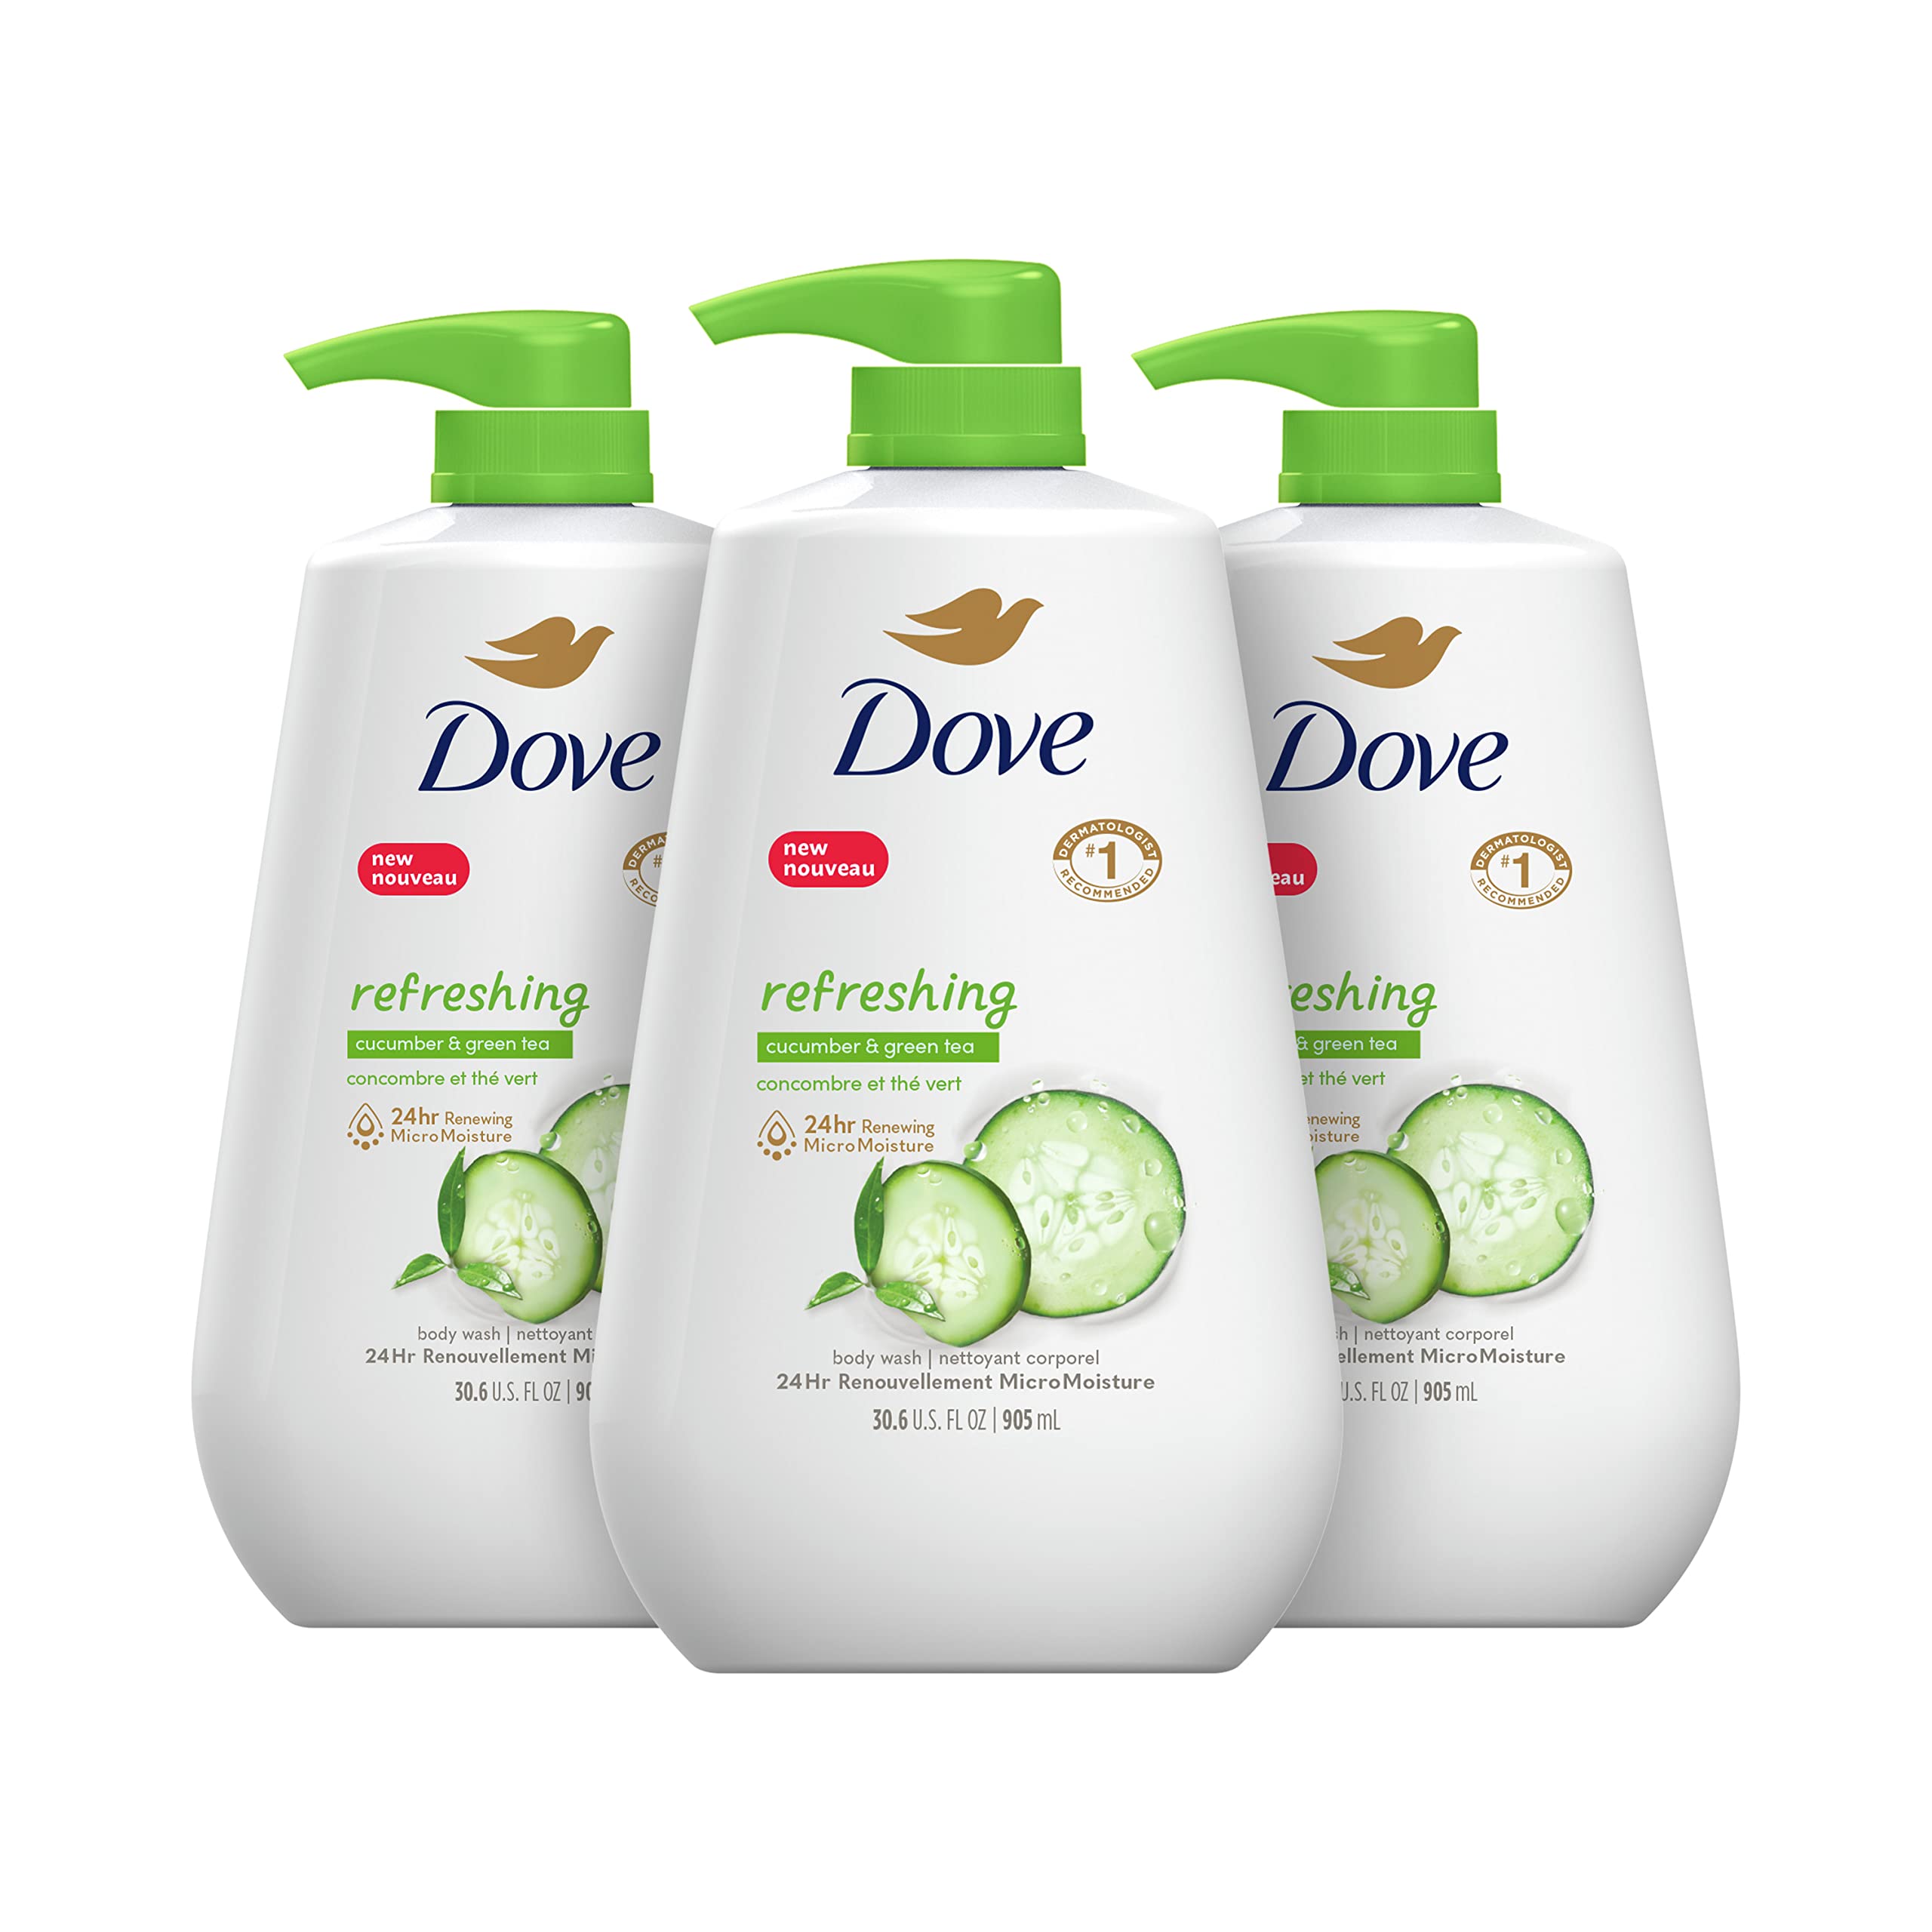 Dove Body Wash with Pump Refreshing Cucumber and Green Tea 3 Count Refreshes Skin Cleanser That Effectively Washes Away Bacteria While Nourishing Your Skin 30.6 oz